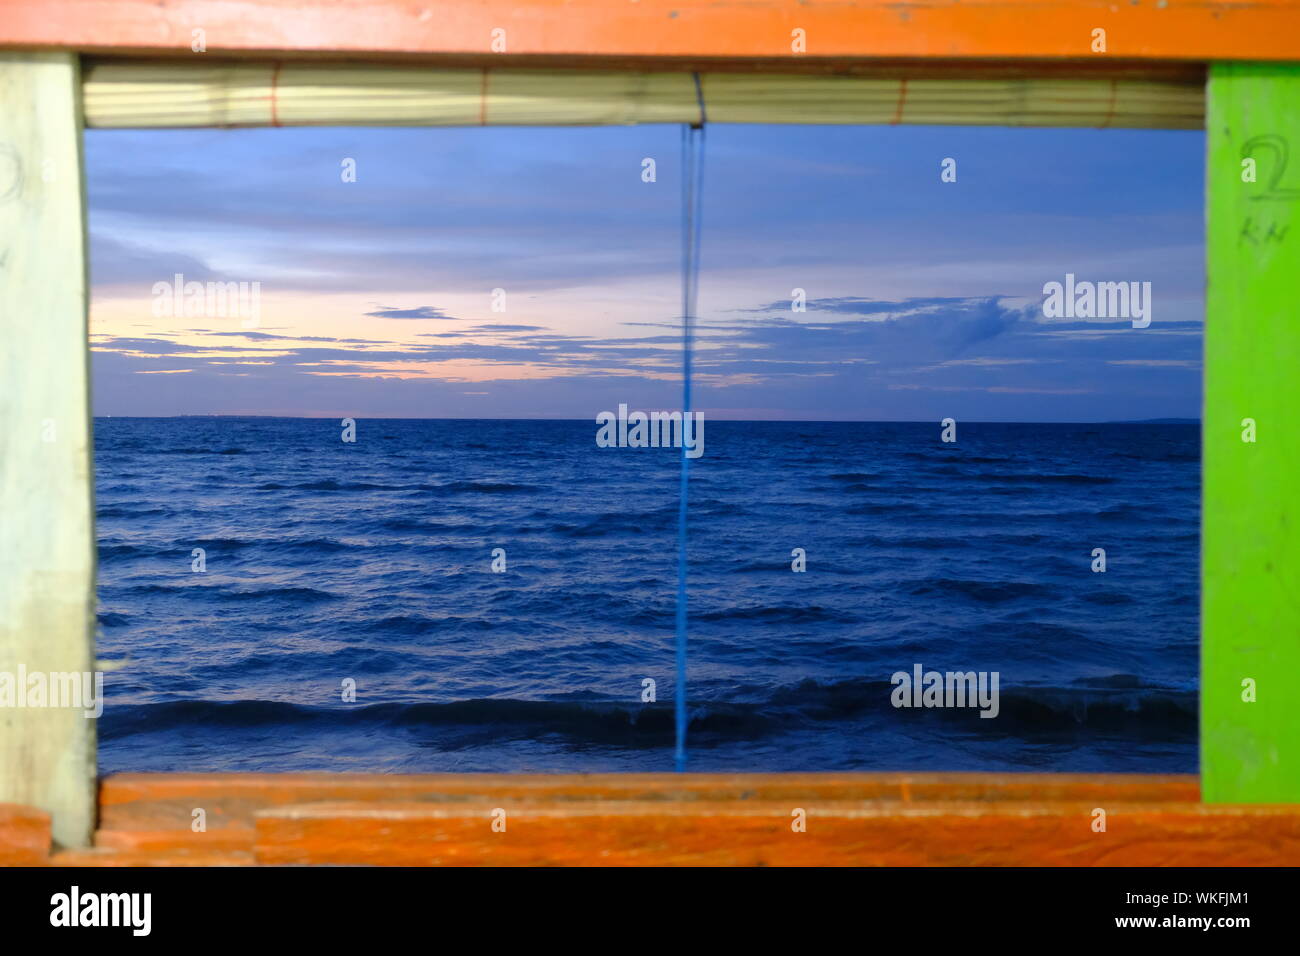 Colorful ocean view window with wooden frame Stock Photo